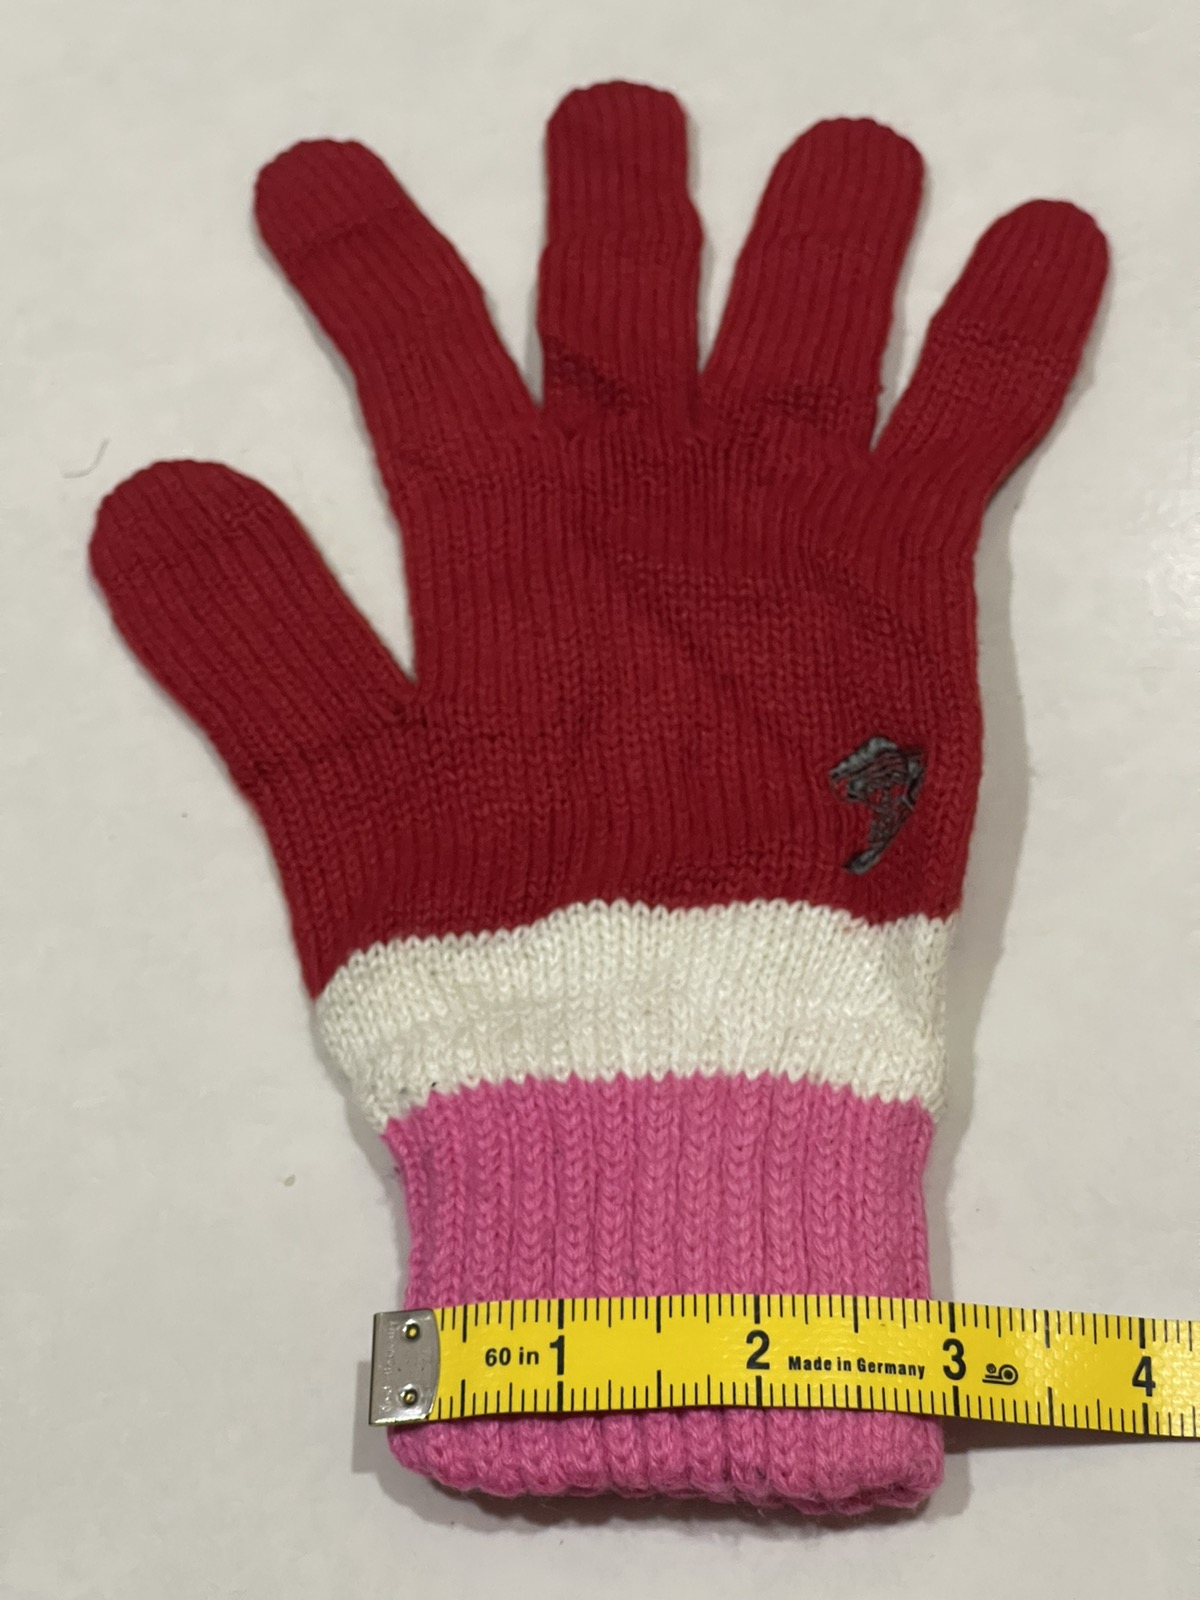 Vivienne Westwood Anglomania Gloves - 13